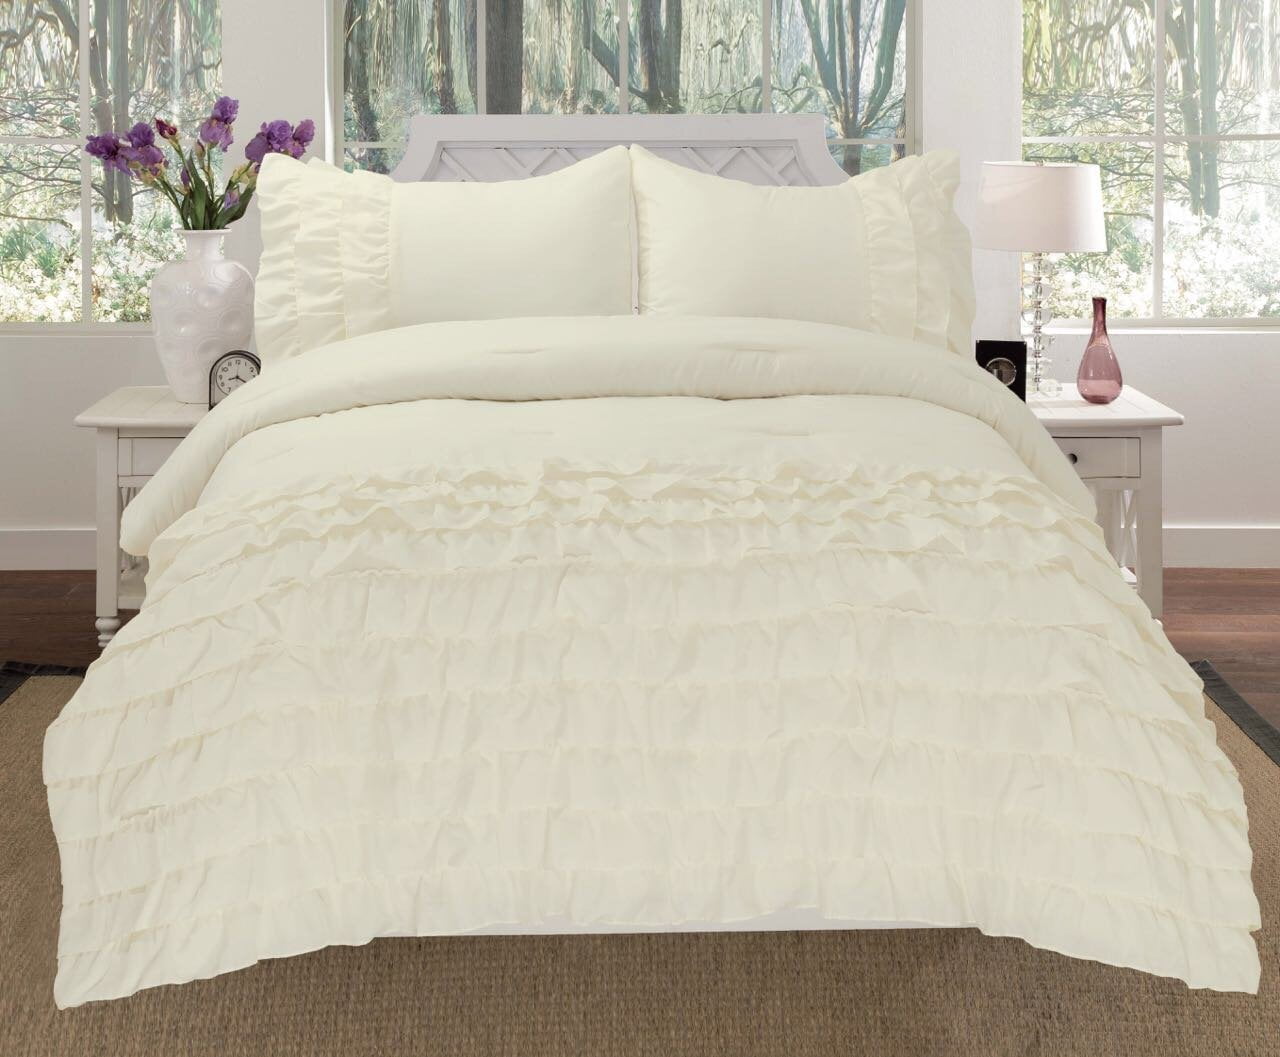 Katy 3 Piece Mini Ruffle Comforter Set Bed Cover New Arrival All Sizes White